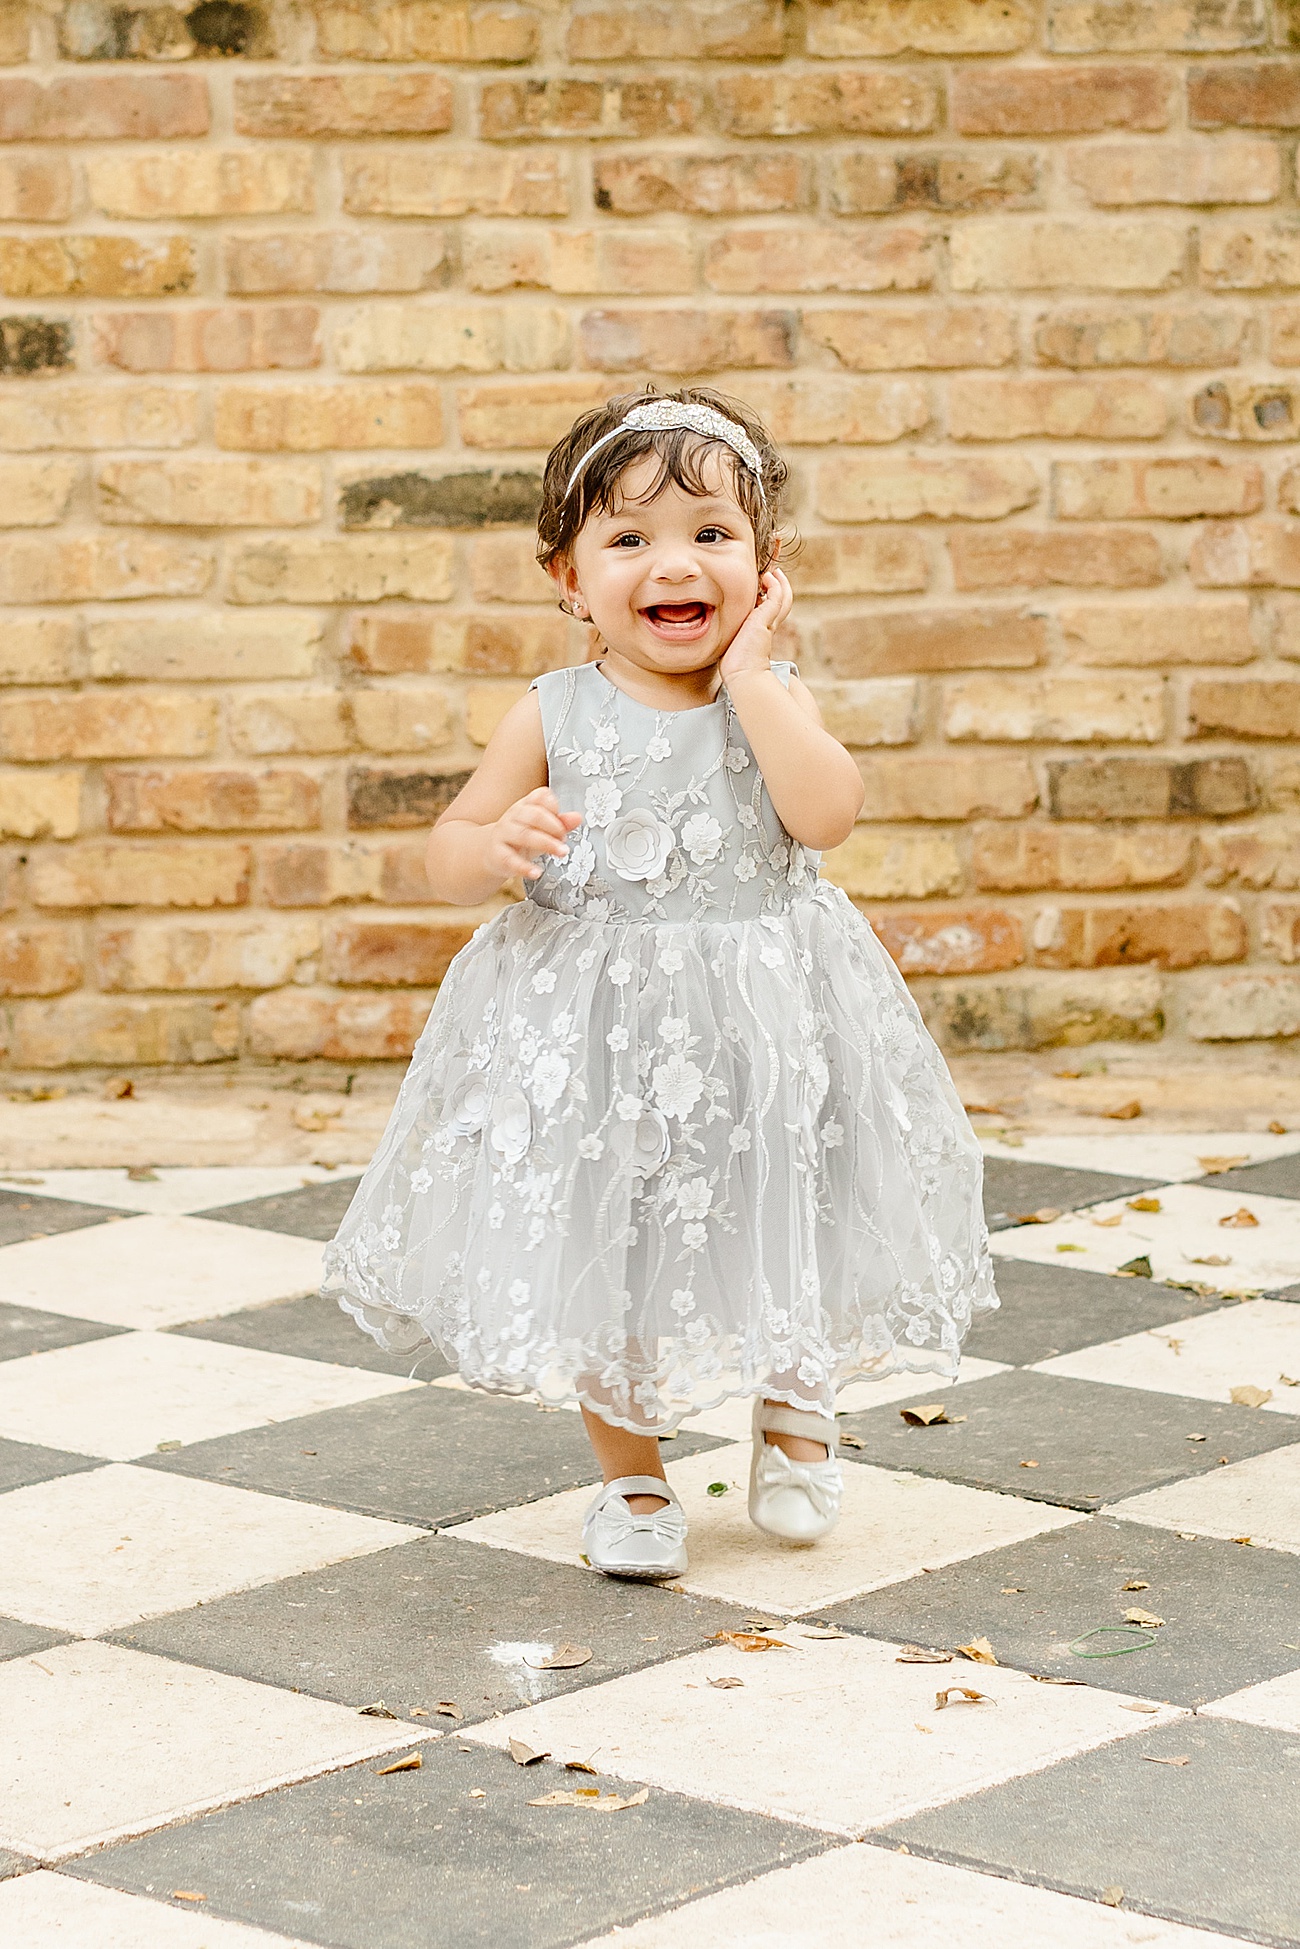 Smiling little girl wearing grey floral dress during first birthday photo session.Photo by Sana Ahmed Photography